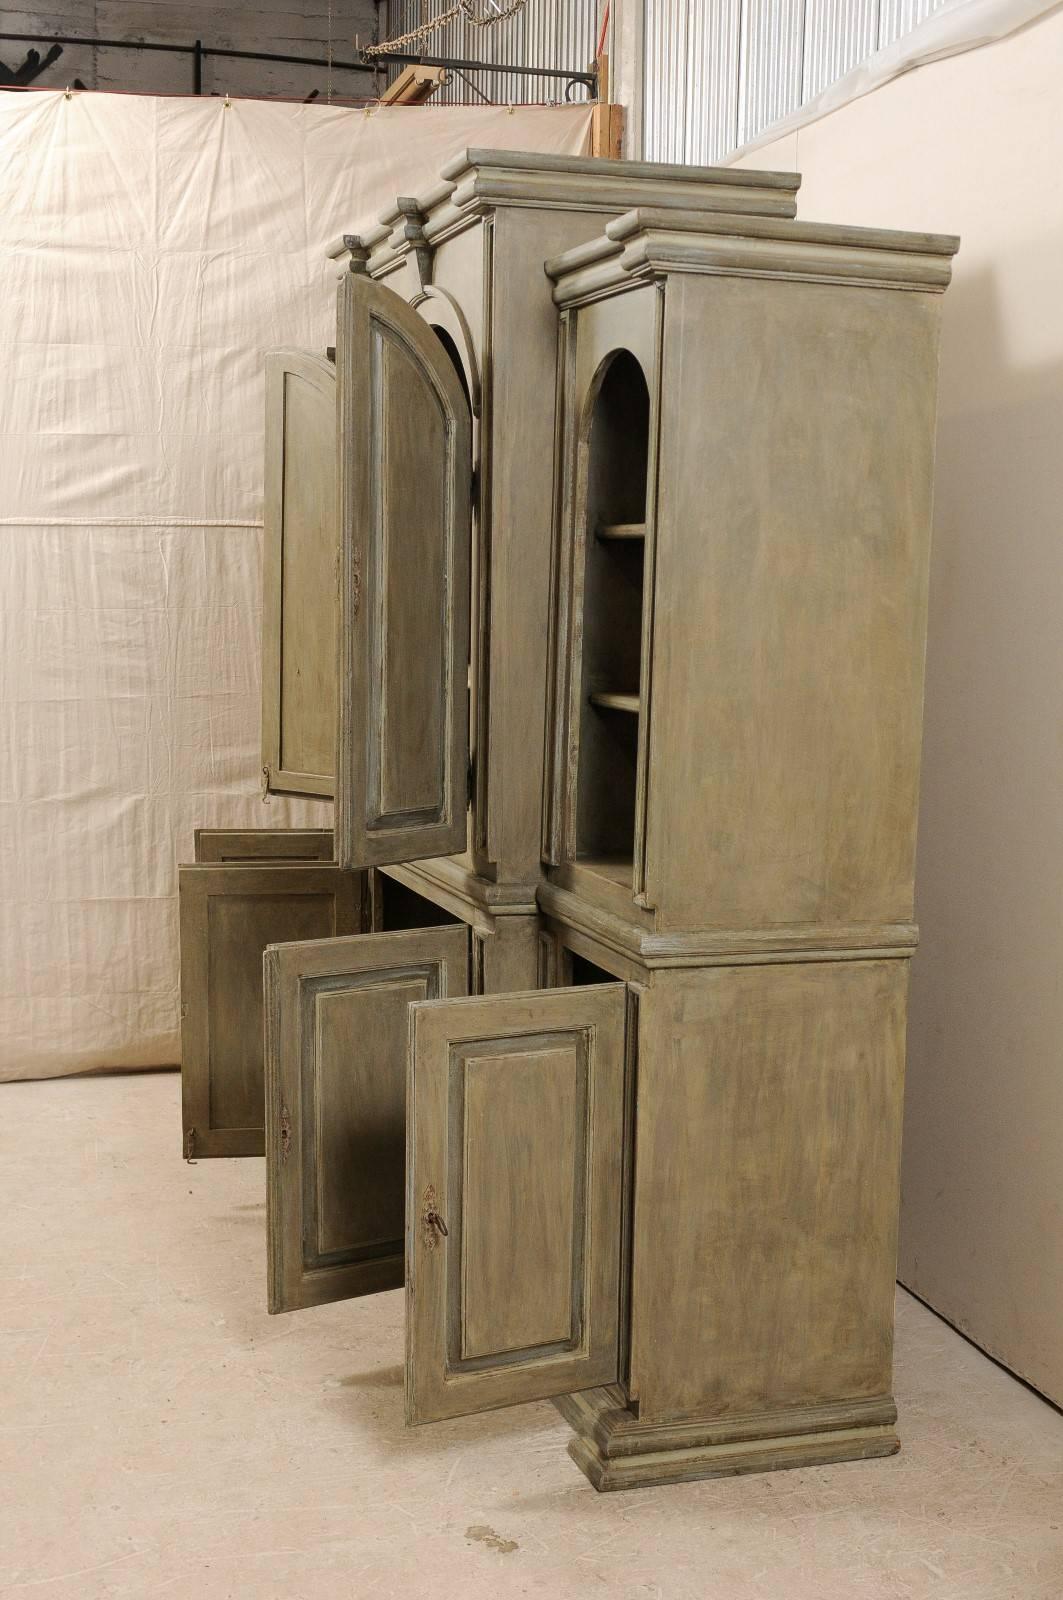 Contemporary Large Sized Brazilian Painted Wood Cabinet Constructed from Reclaimed Wood